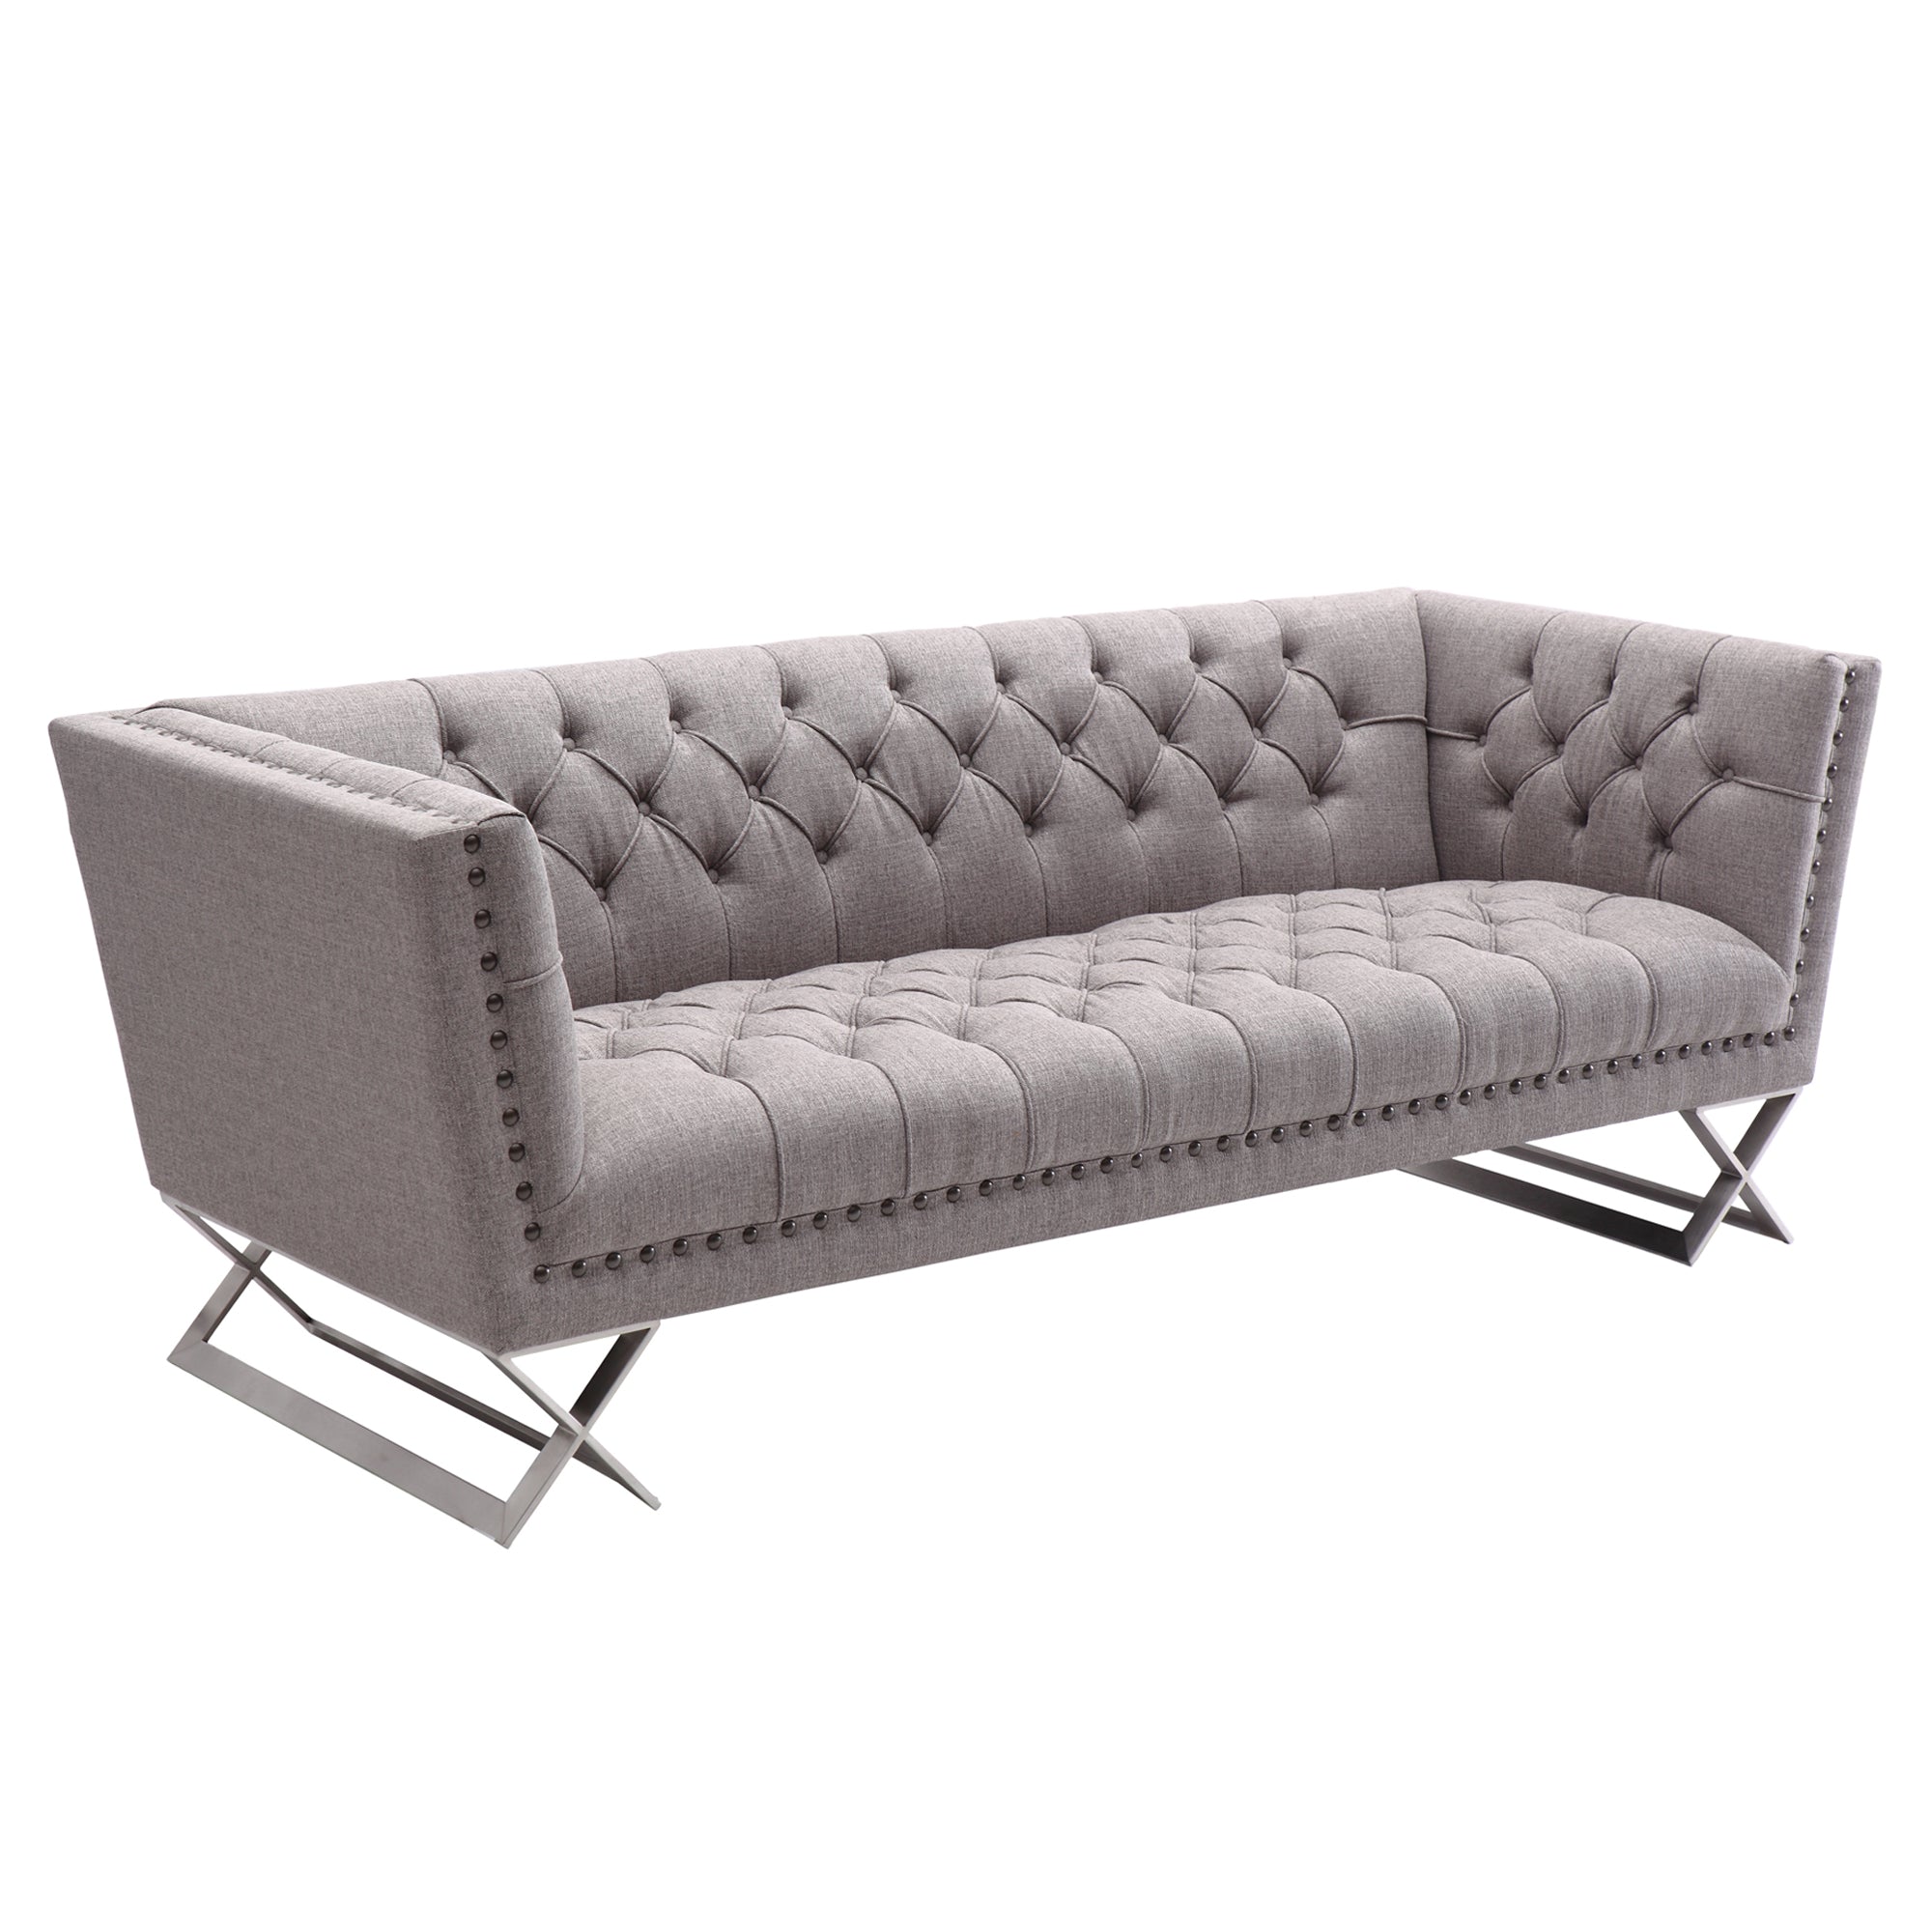 Armen Living Lcod3gr Odyssey Sofa In Brushed Stainless Steel Finish With Grey Tweed And Black Nail Heads